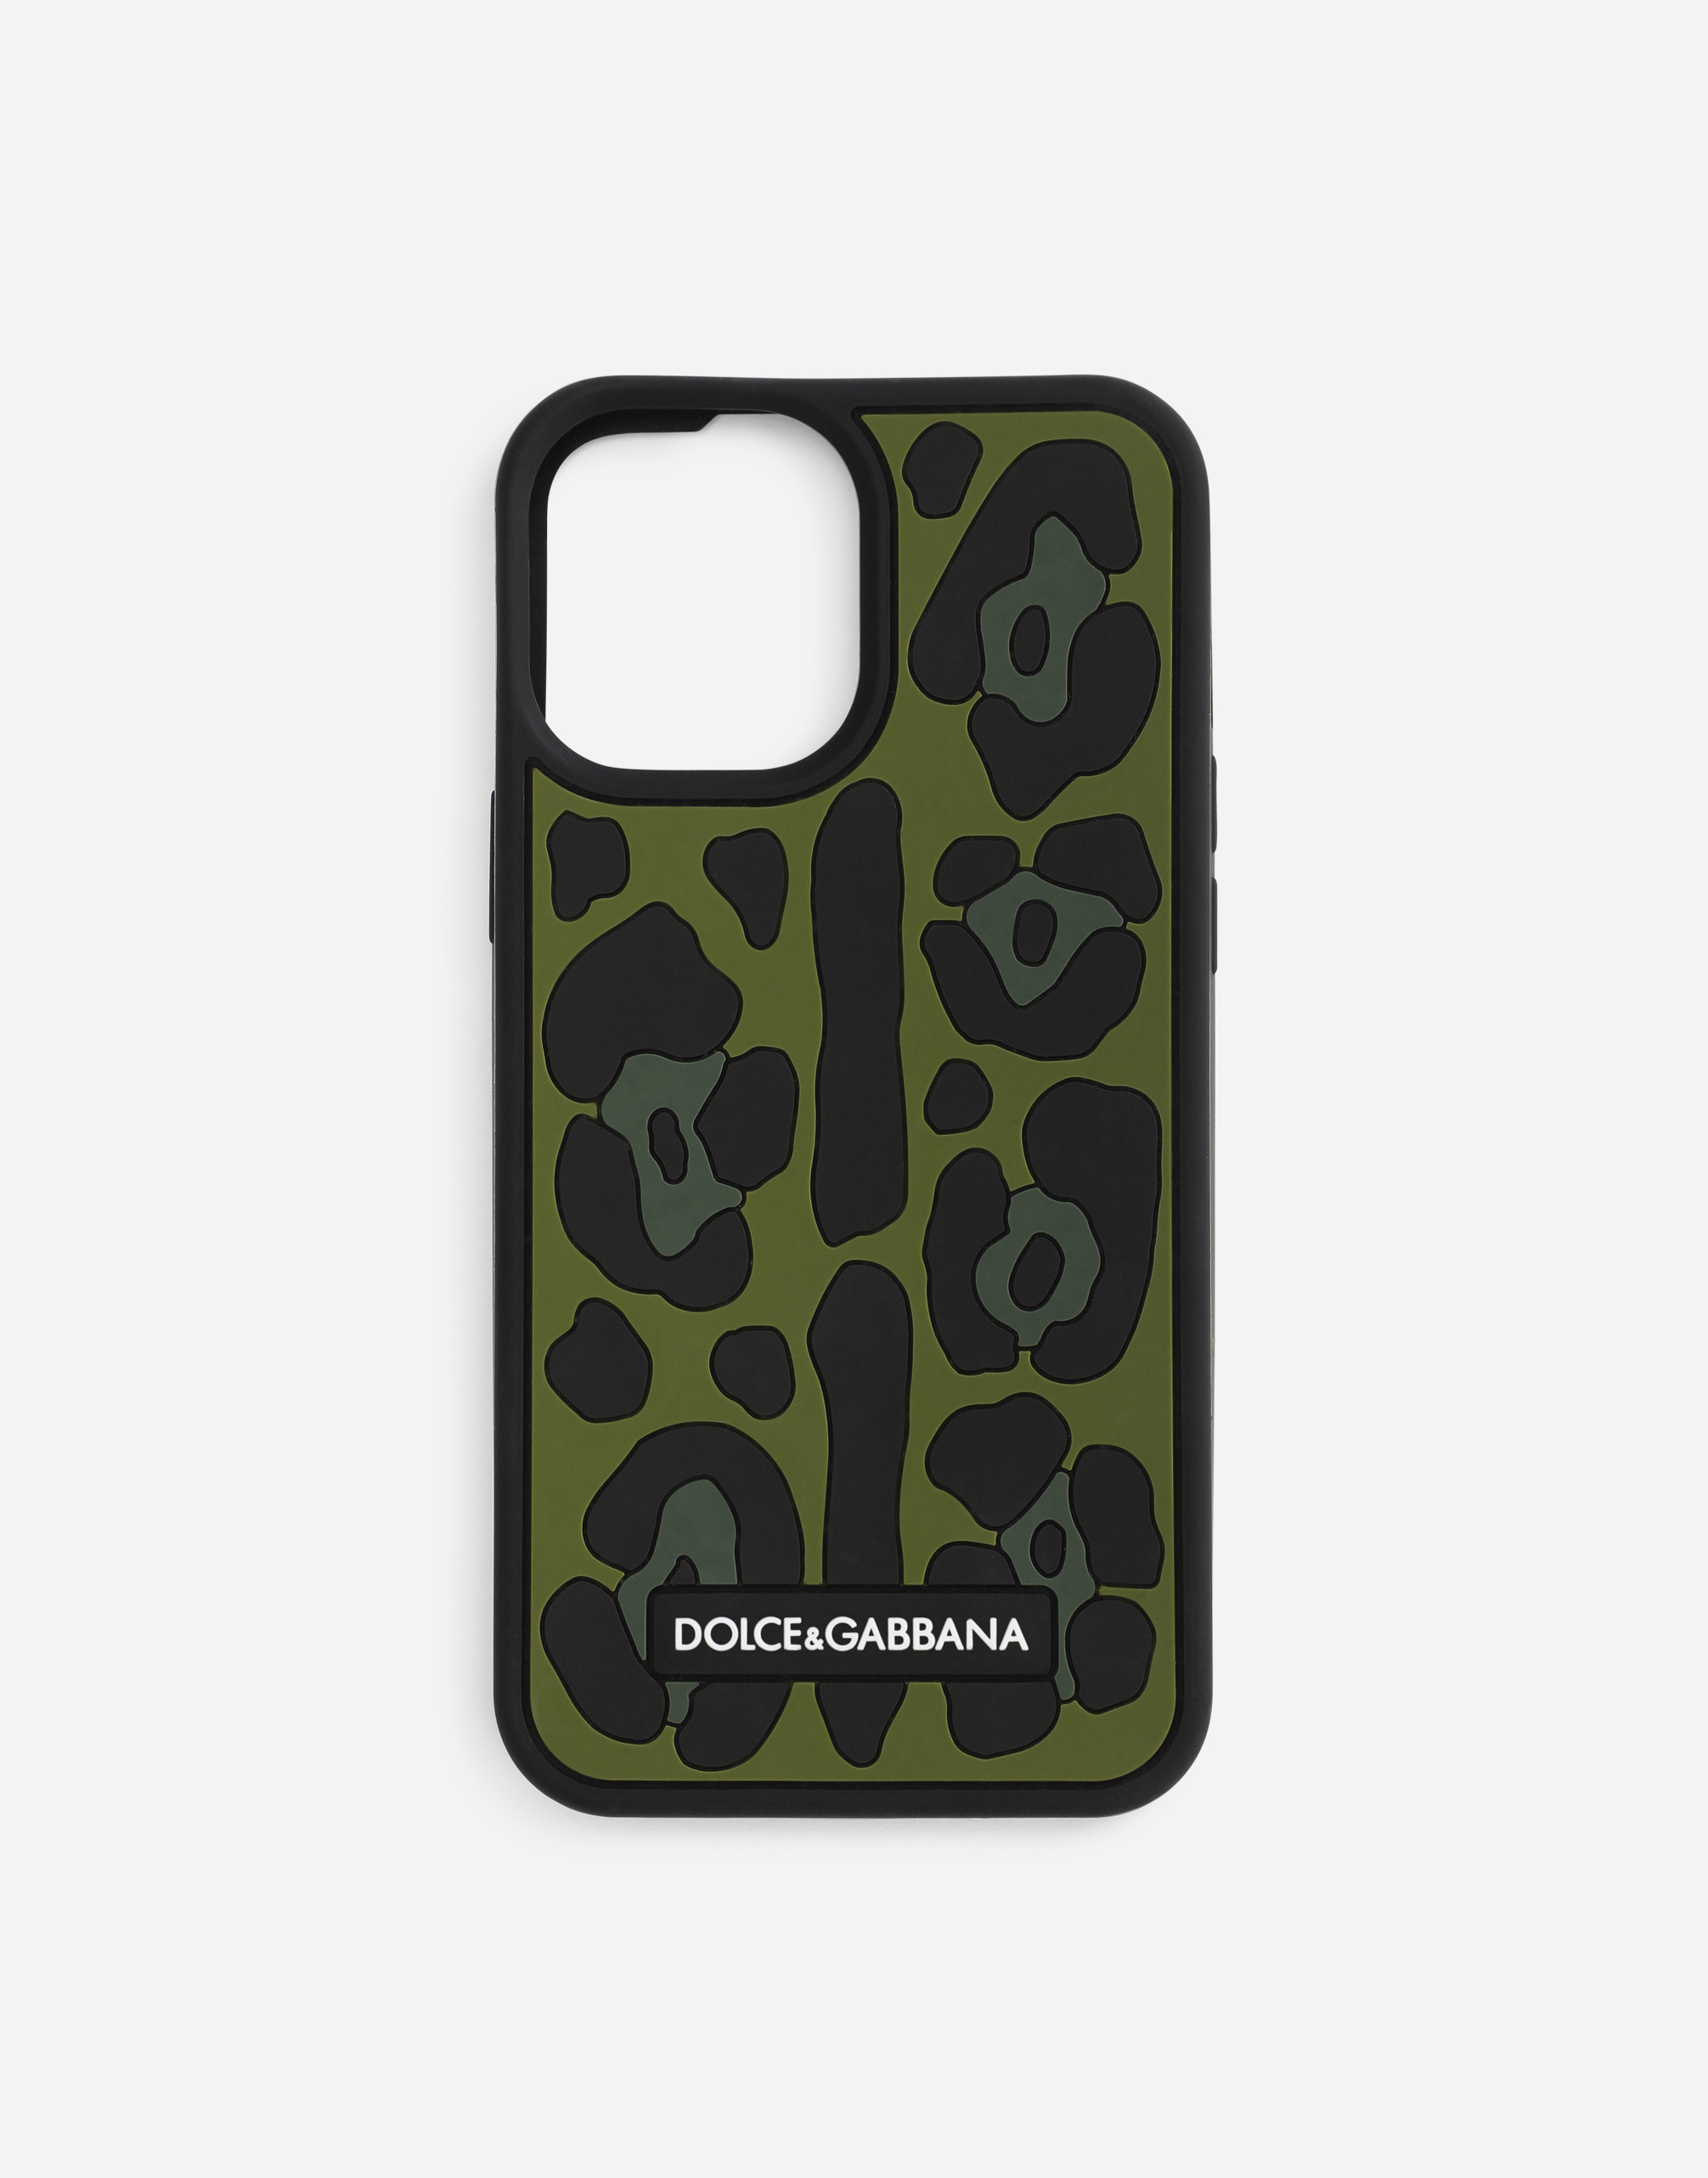 Rubber iPhone 12 Pro Max cover with leopard print against a green background in Multicolor